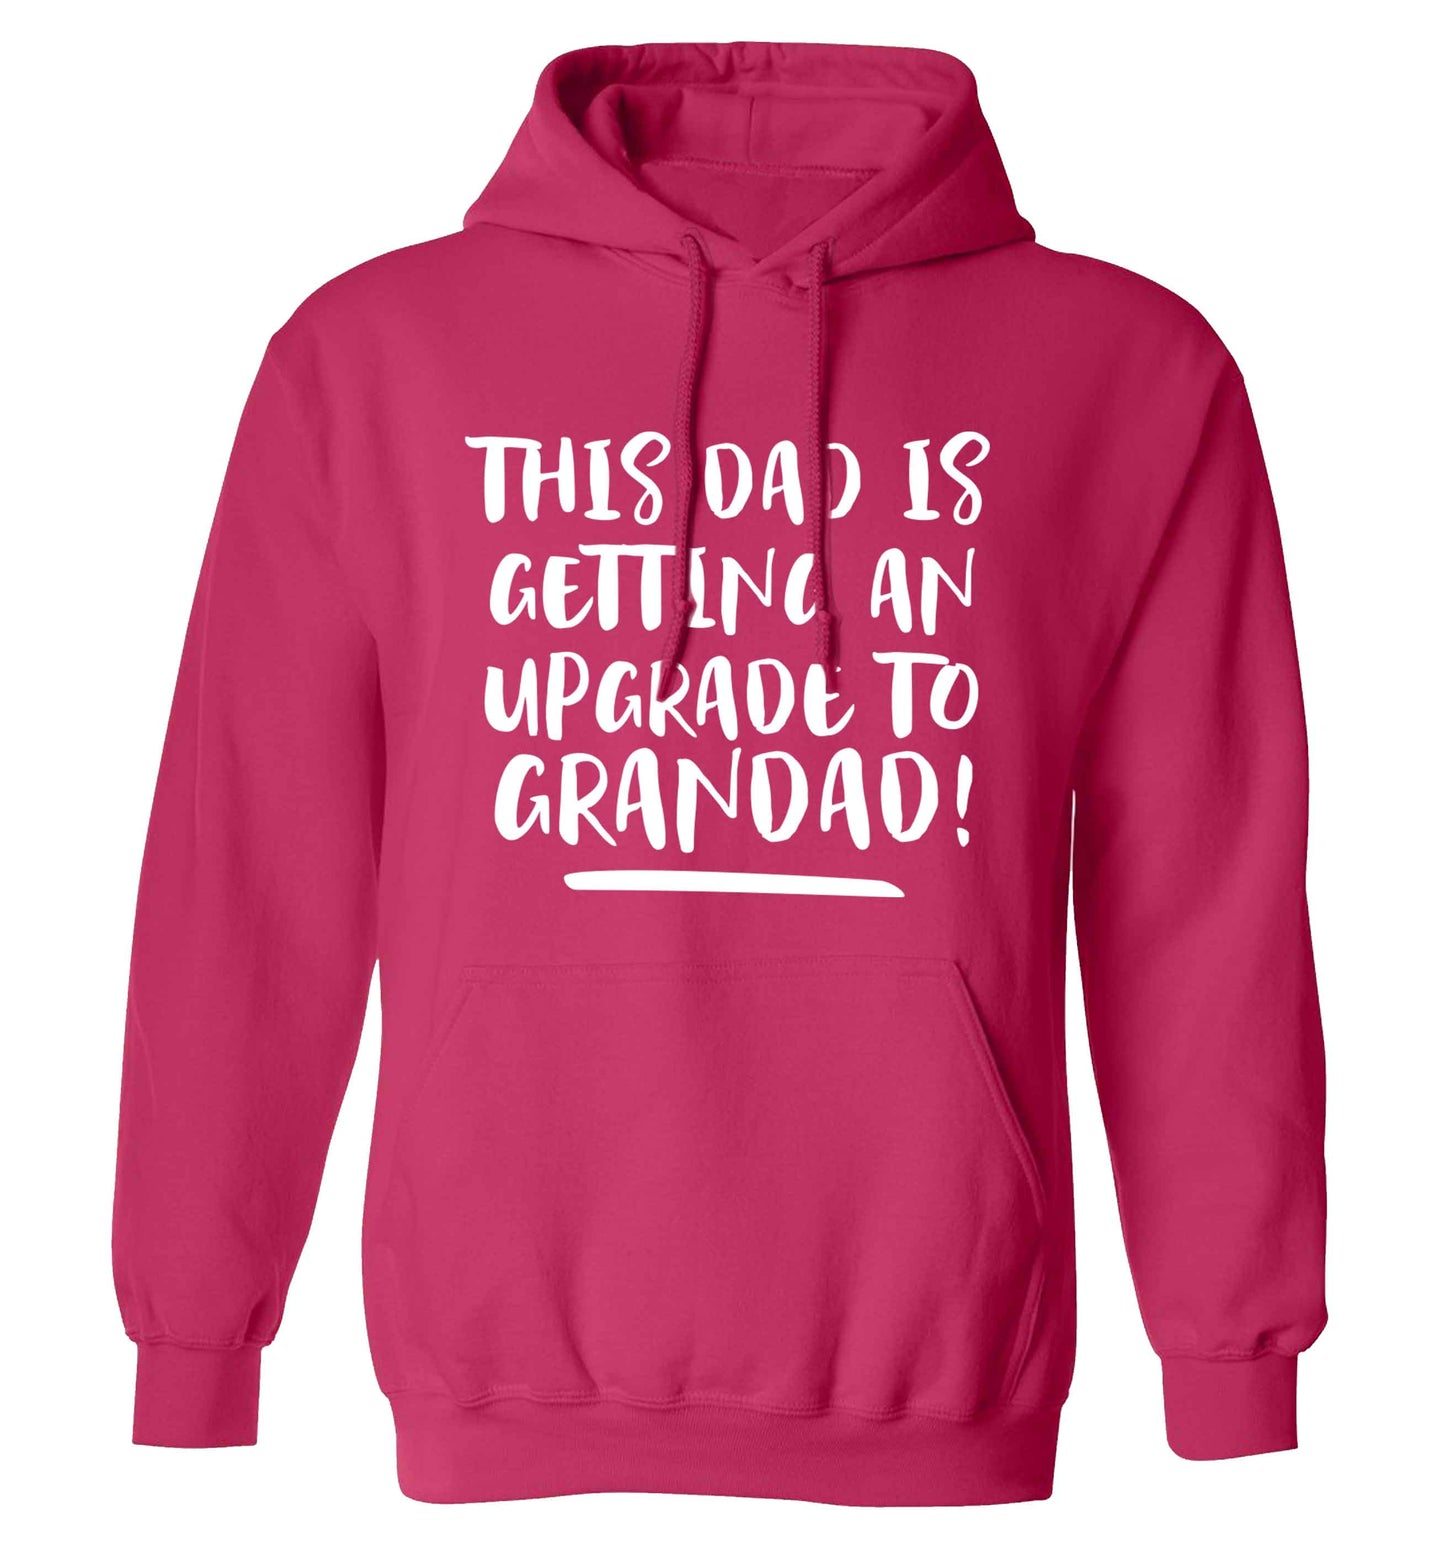 This dad is getting an upgrade to grandad! adults unisex pink hoodie 2XL